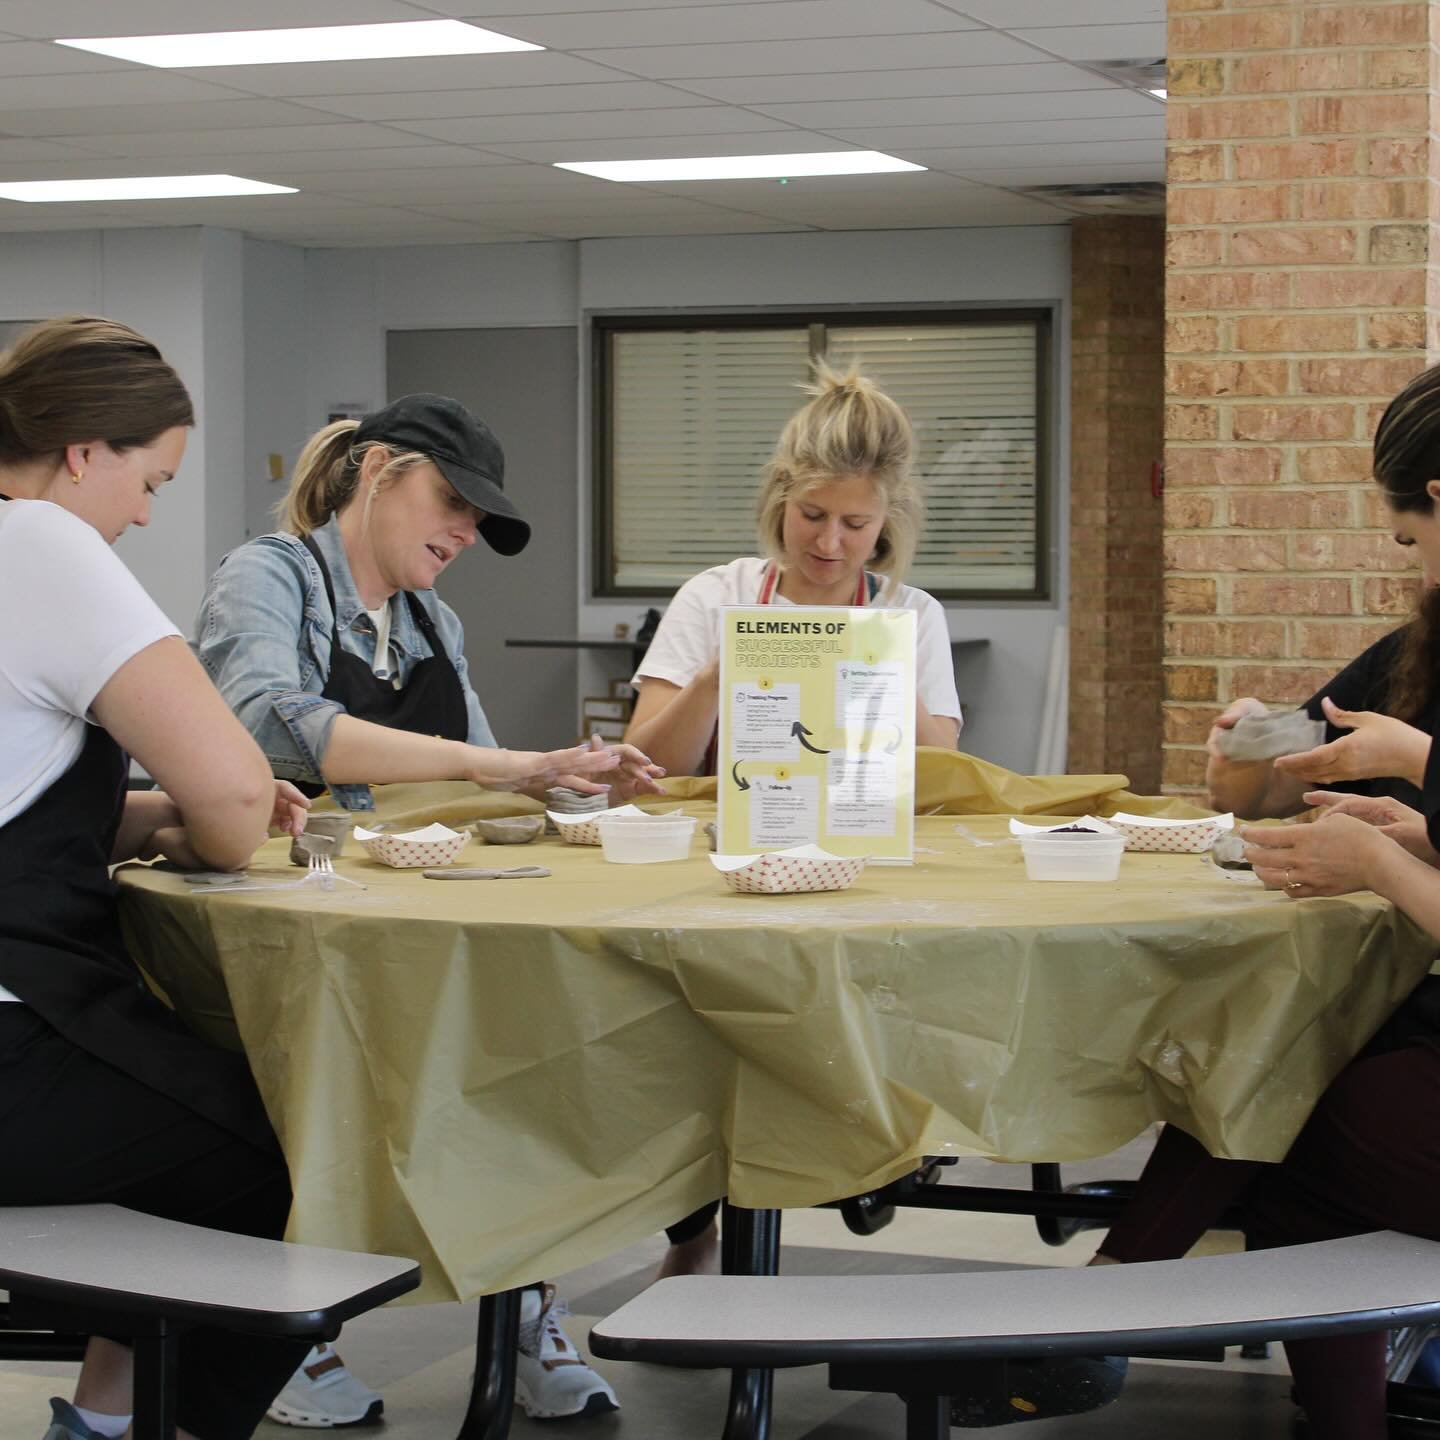 Our staff got to enjoy some various types of Wellness activities during their Professional Development today✨

All the different sessions were engaging and informative! 
From candle making and ceramics, to kickball and step class&mdash;our staff had 